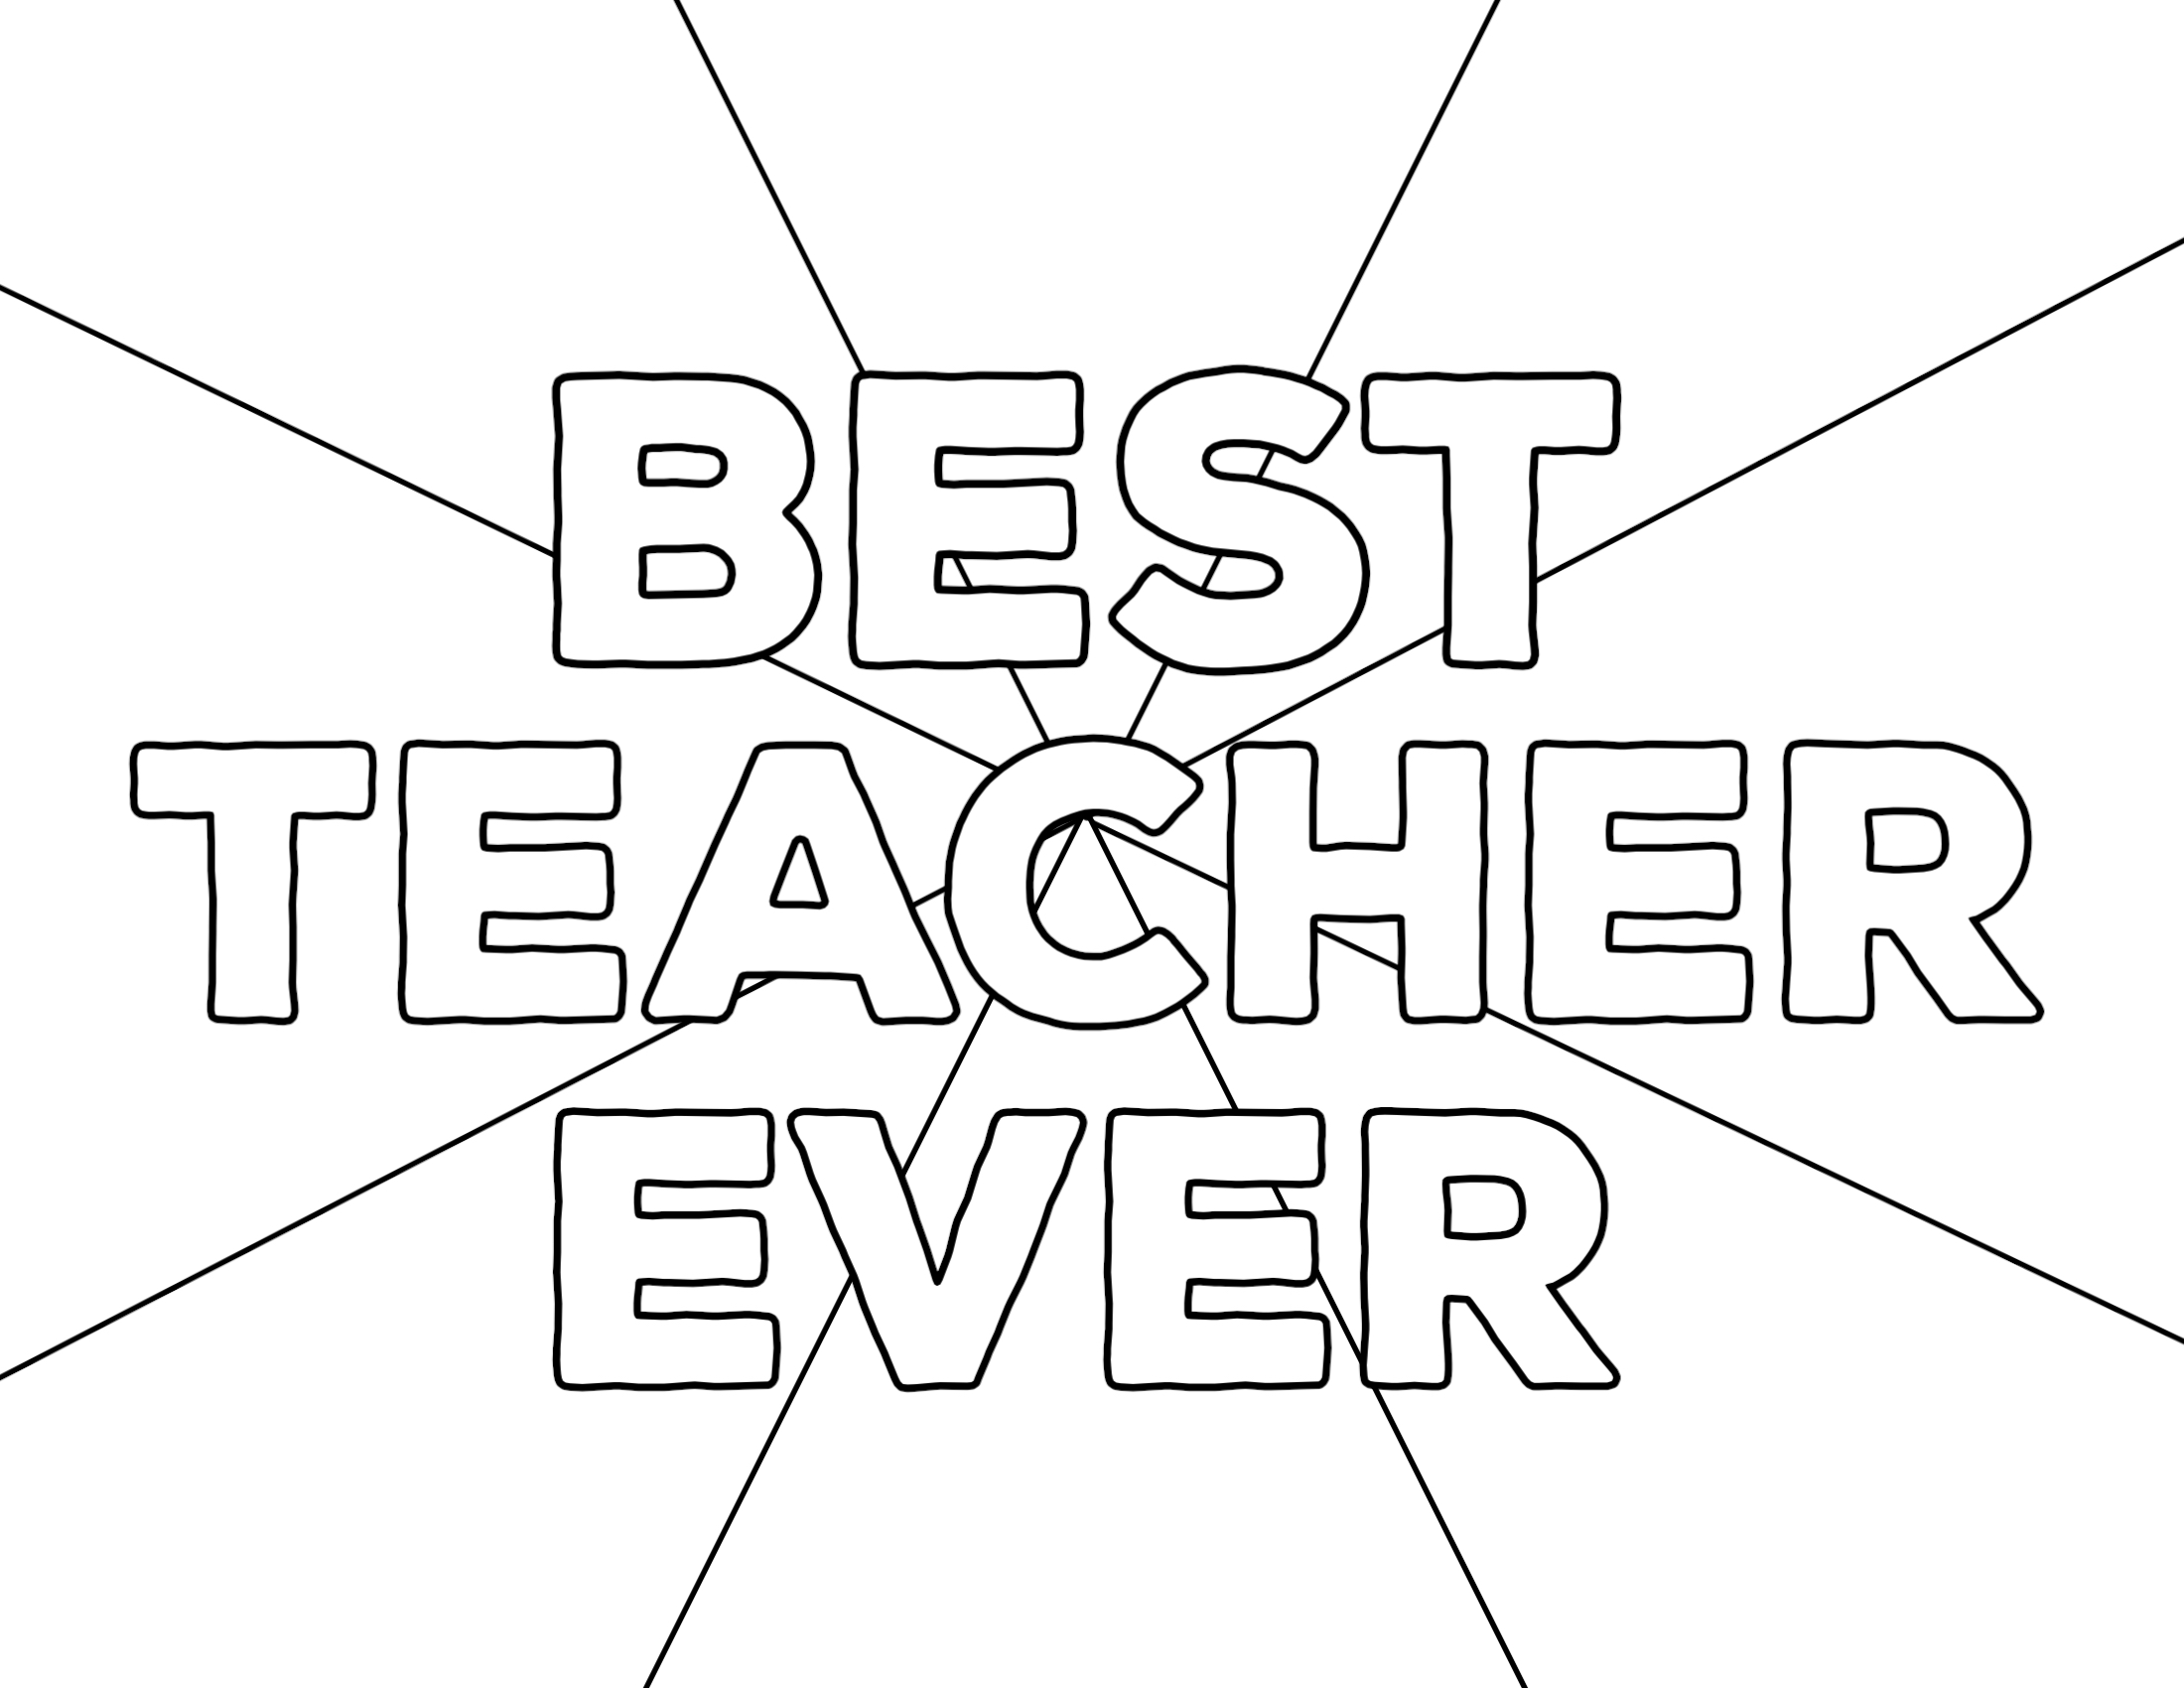 Washingtonville csd on x its teacherappreciationweek celebrate with us virtually or physically plete this printable âbest teacher everâ coloring sheet email a photo to your teacher to say âthank youâ parents share